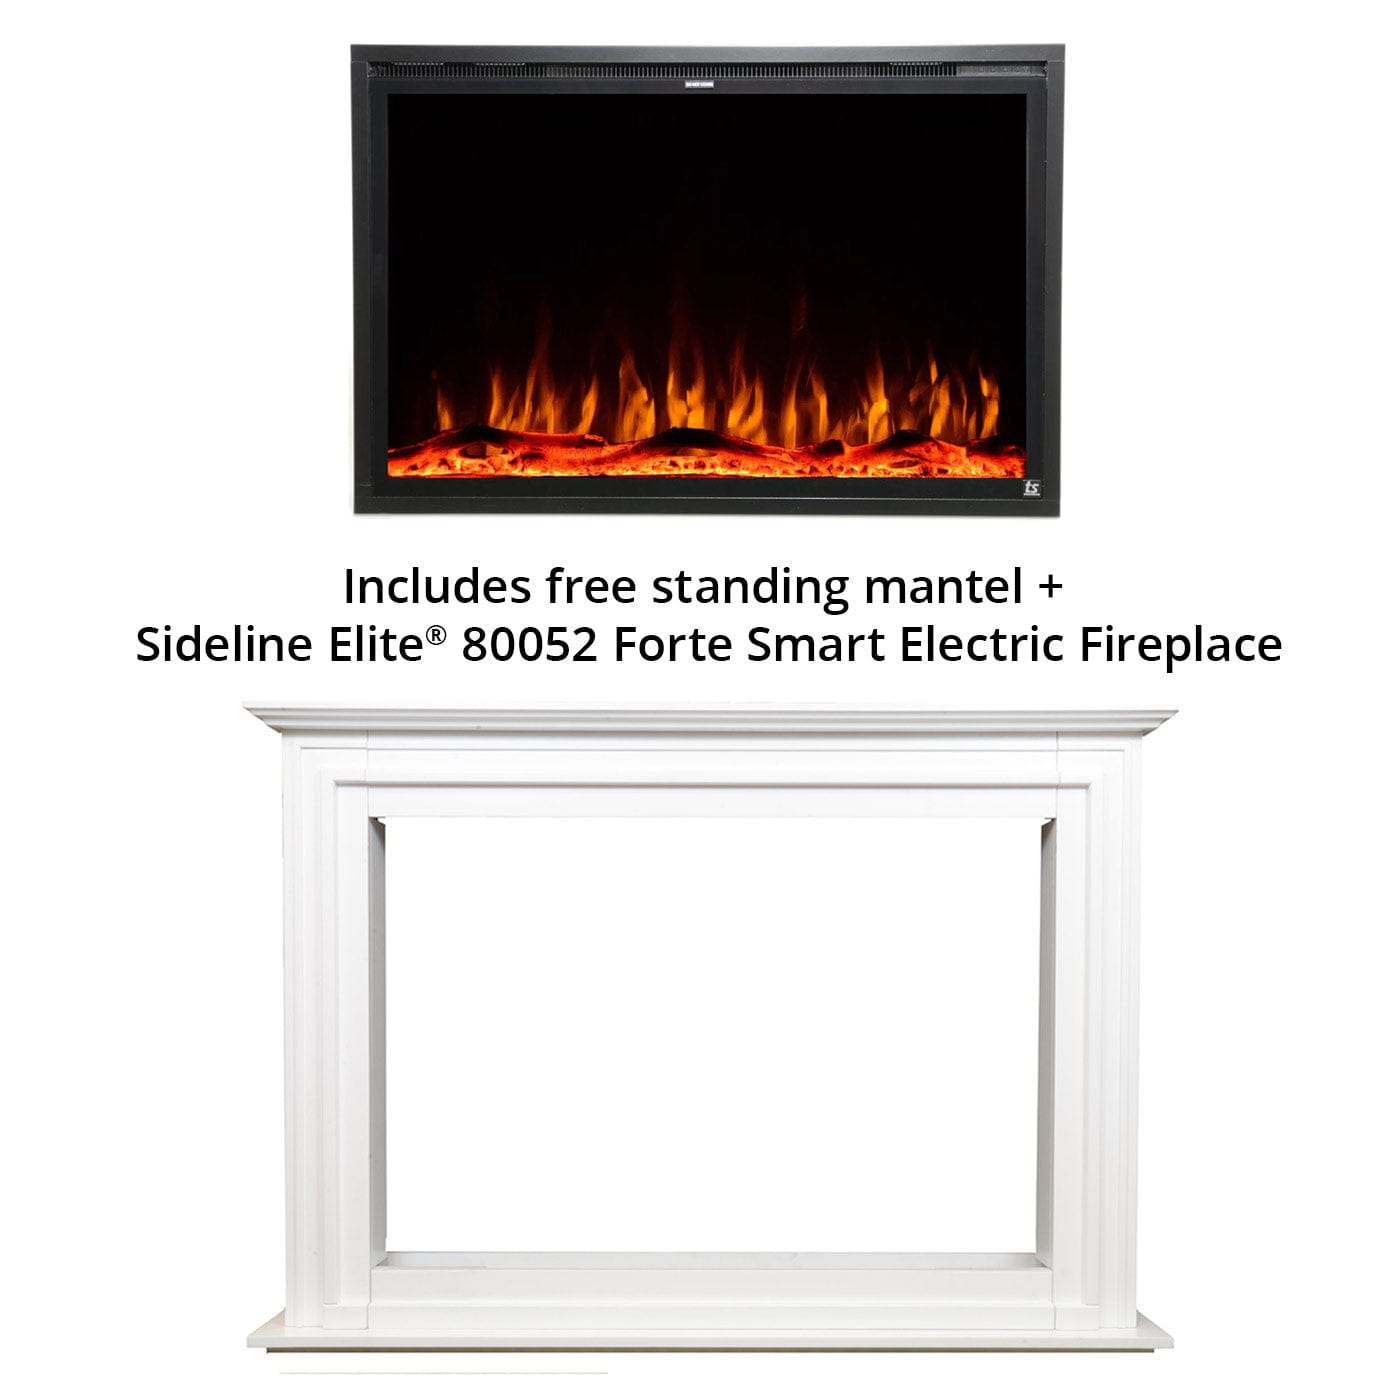 Freestanding mantel for the Sideline Elite 80052 Forte Smart Electric Fireplace by Touchstone